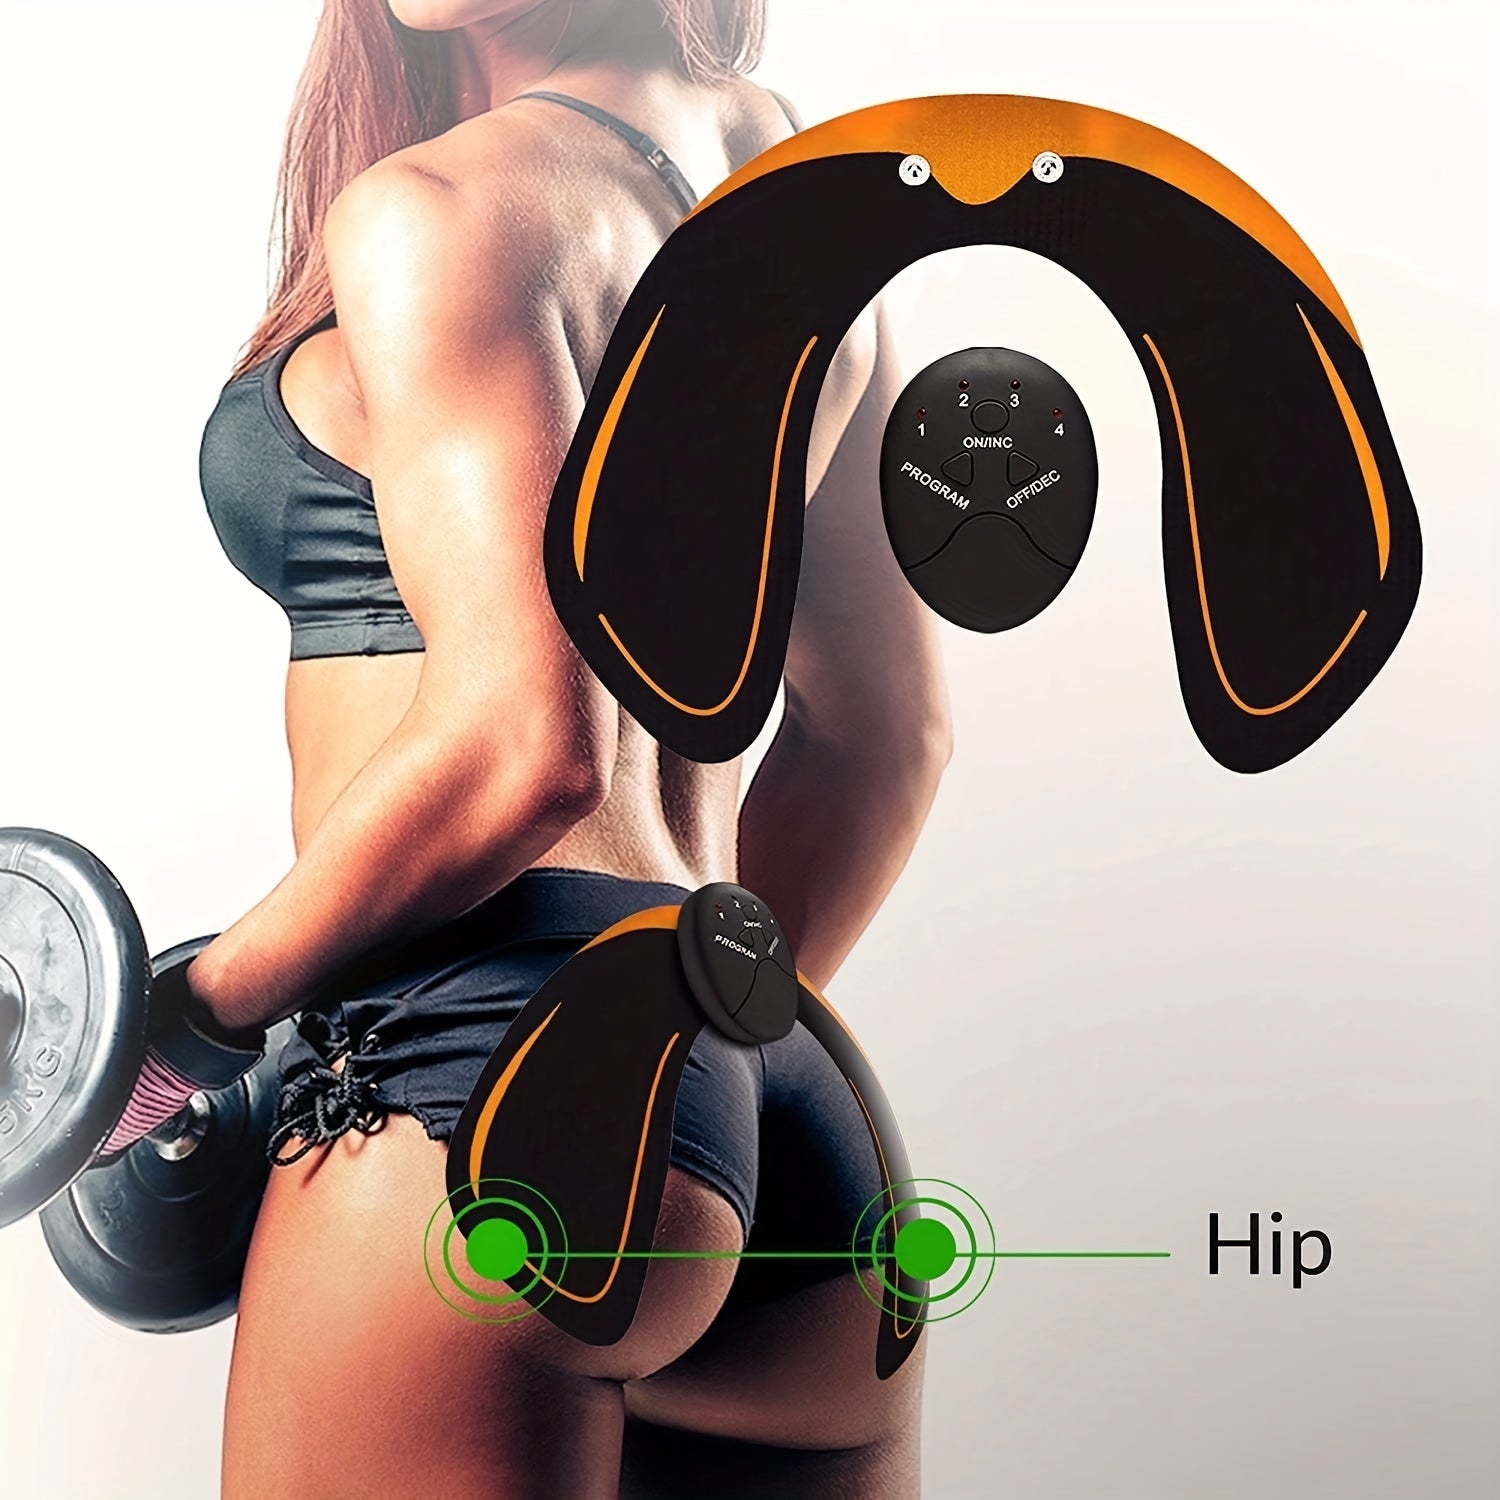 hip-trainer-buttock-lift-massage-device-smart-fitness-exercise-gear-home-office-portable-u-shape-butt-lifting-workout-equipment-gifts-for-women